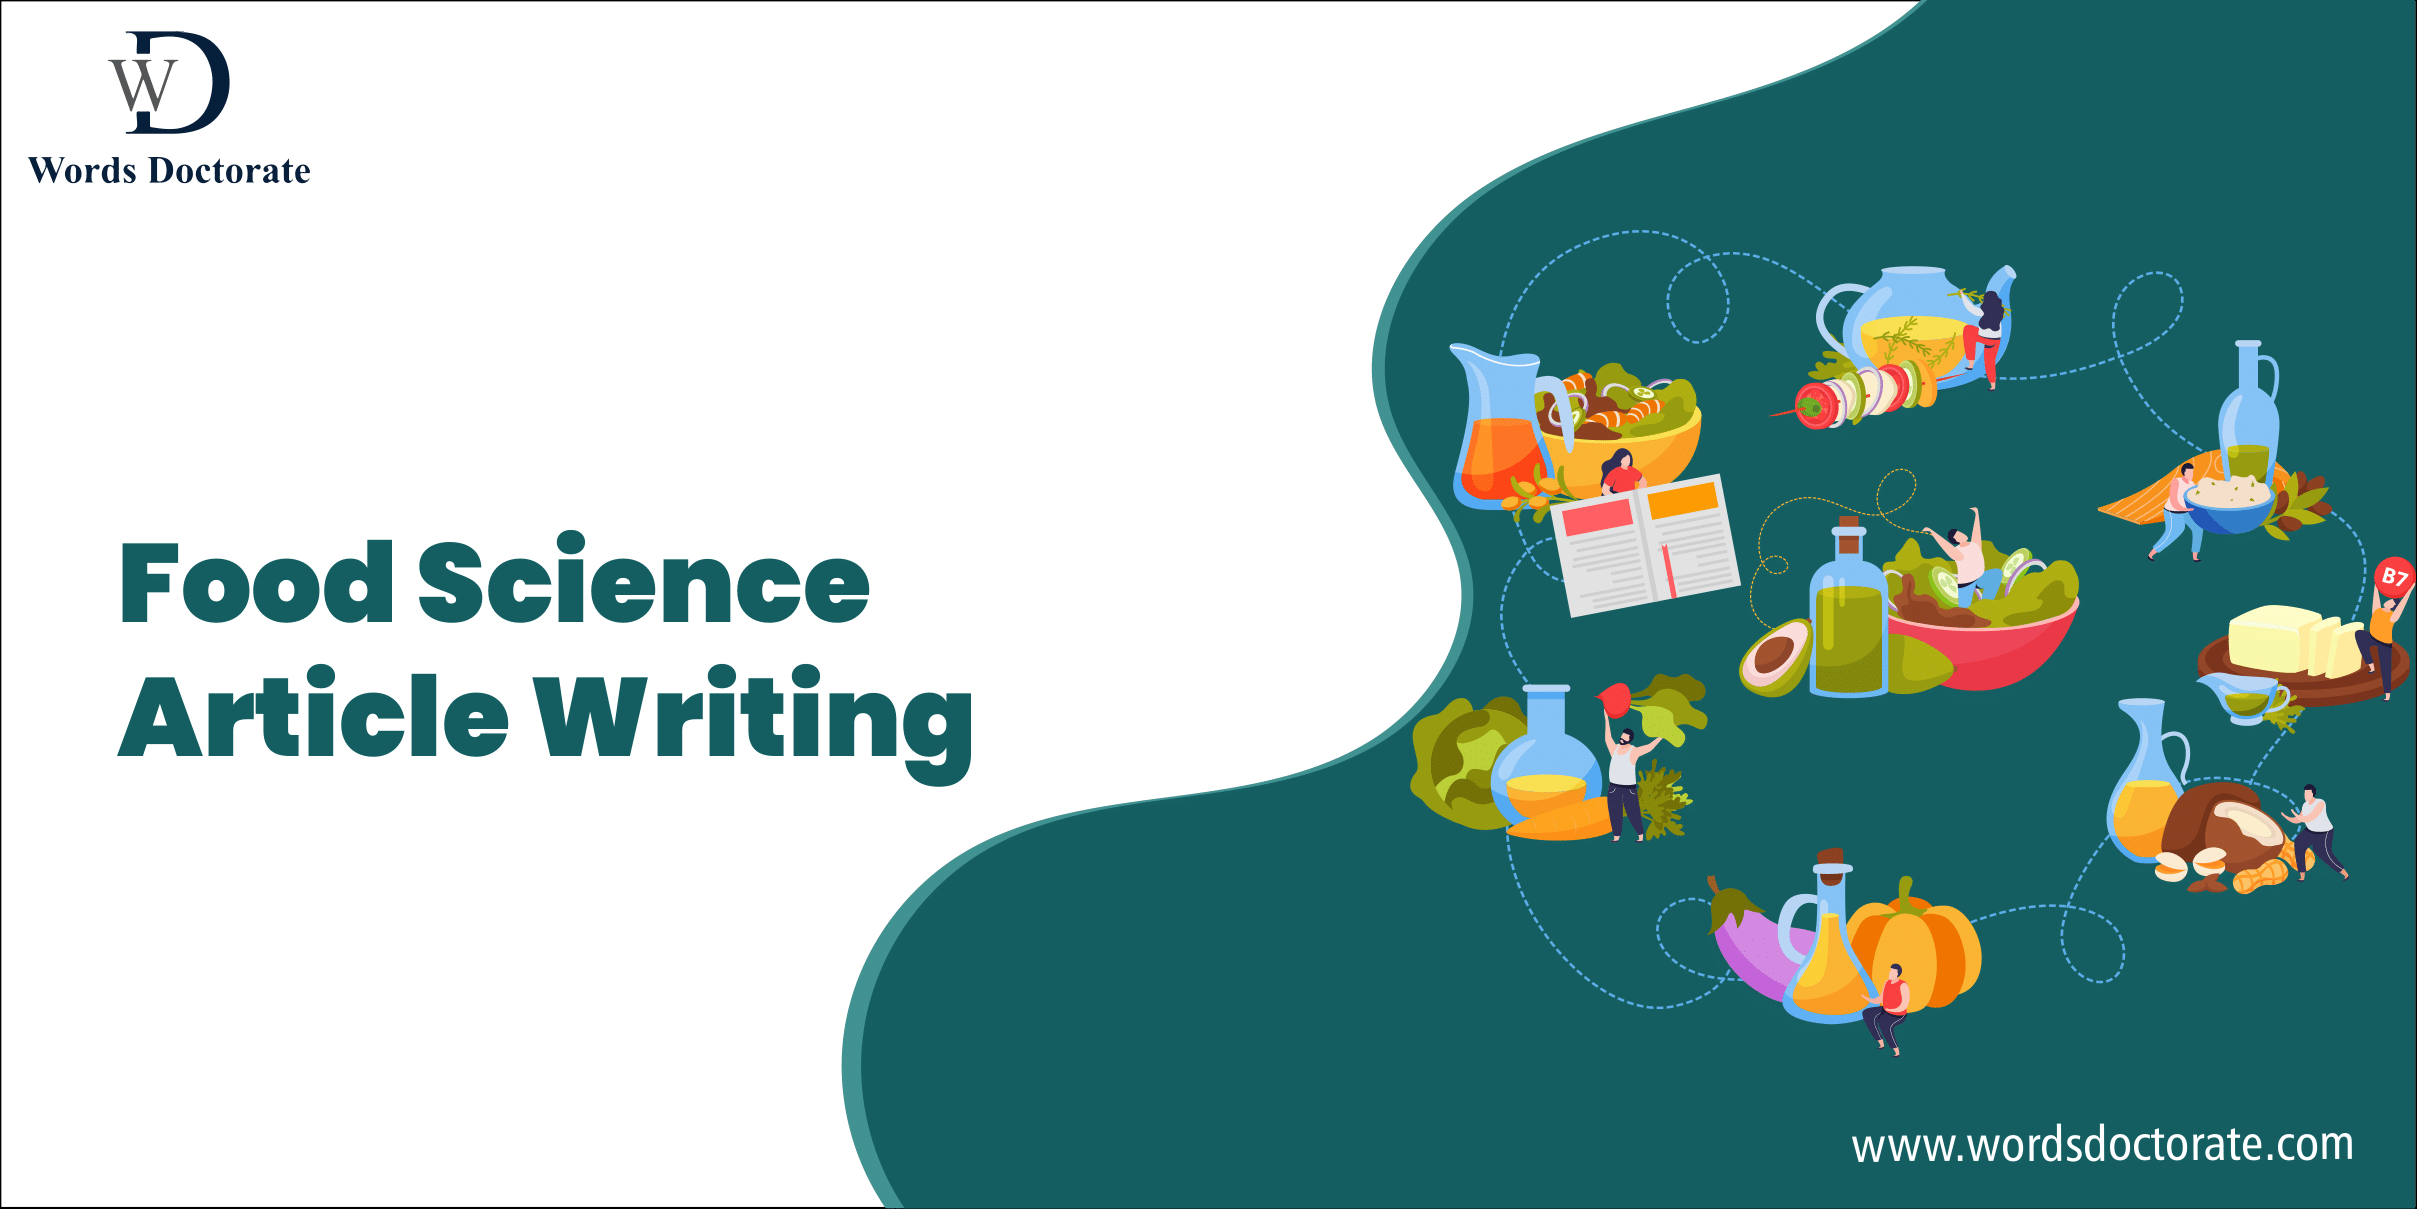 Food Science Article Writing